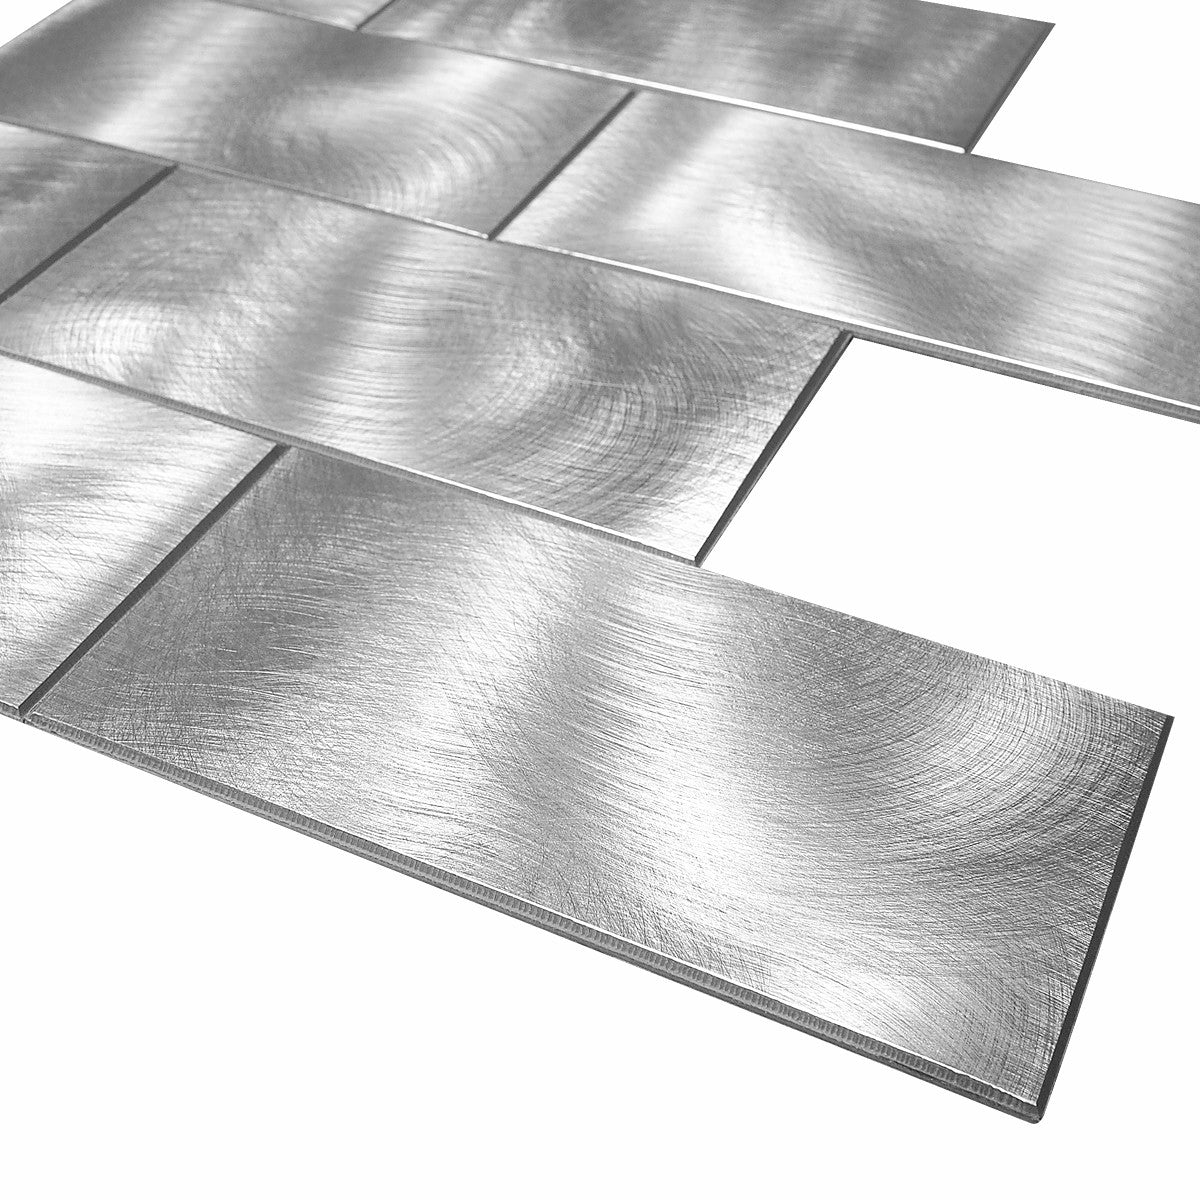 Decopsu Metal Subway Tile Backsplash Peel and Stick (Retangle Silver, Rotary Abrased 5pc/Pack) for Kitchen Bathroom Wall Accent 15in x 12in 1.6in Thick, Self Adhesive Metal Tile